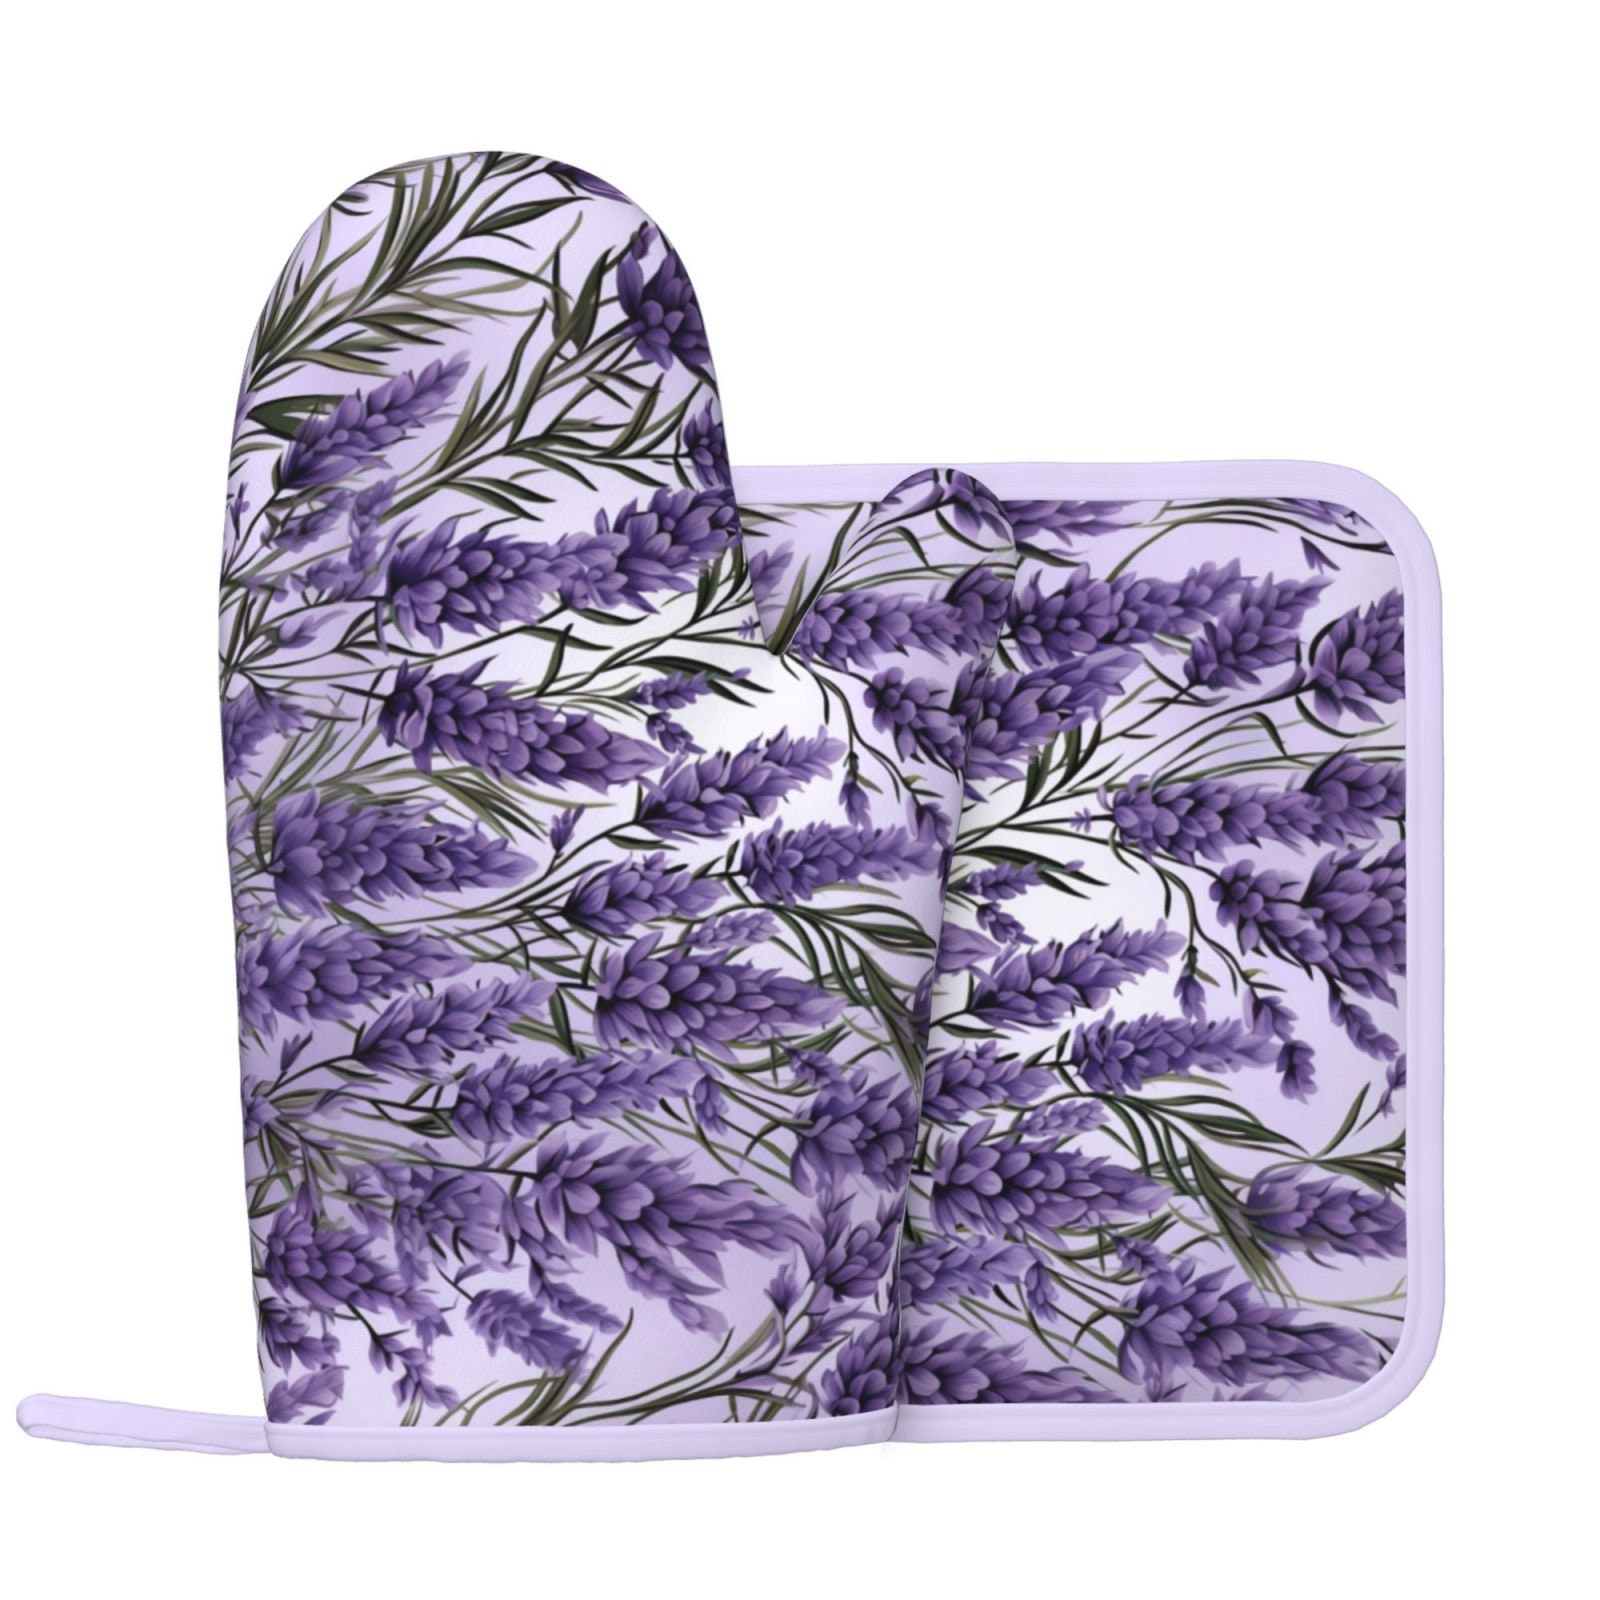 Lefty's Purple With Dots Oven Mitt For The Left Hand